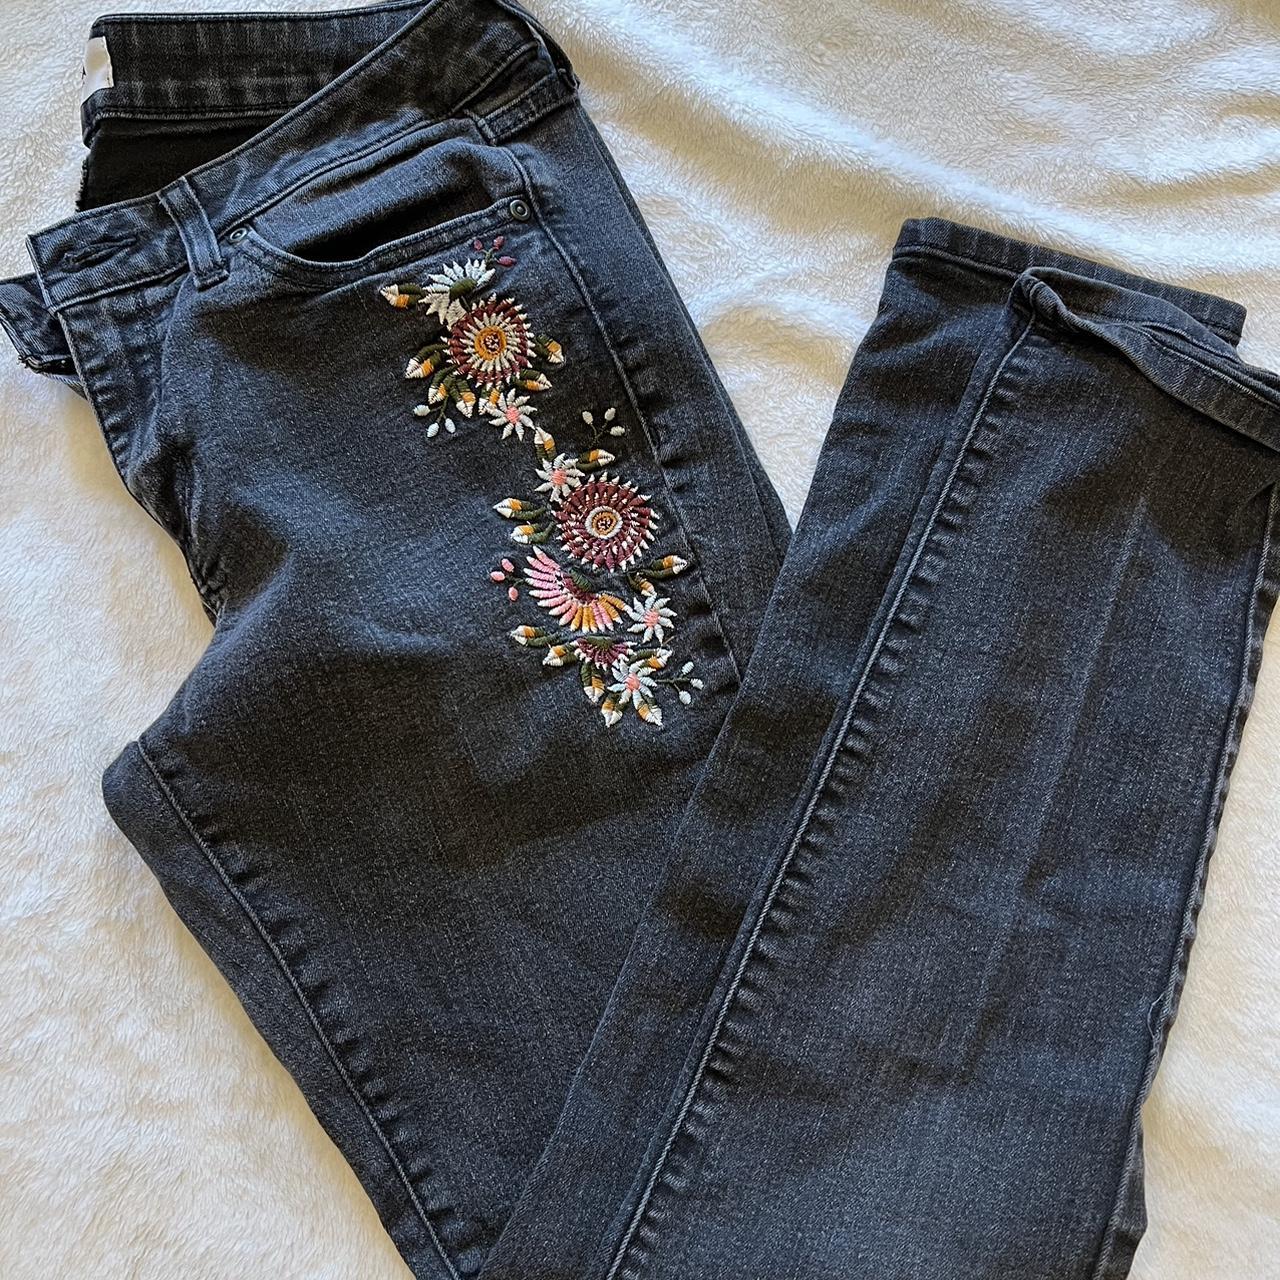 Sonoma skinny jeans size womens 10. Has embroidered - Depop